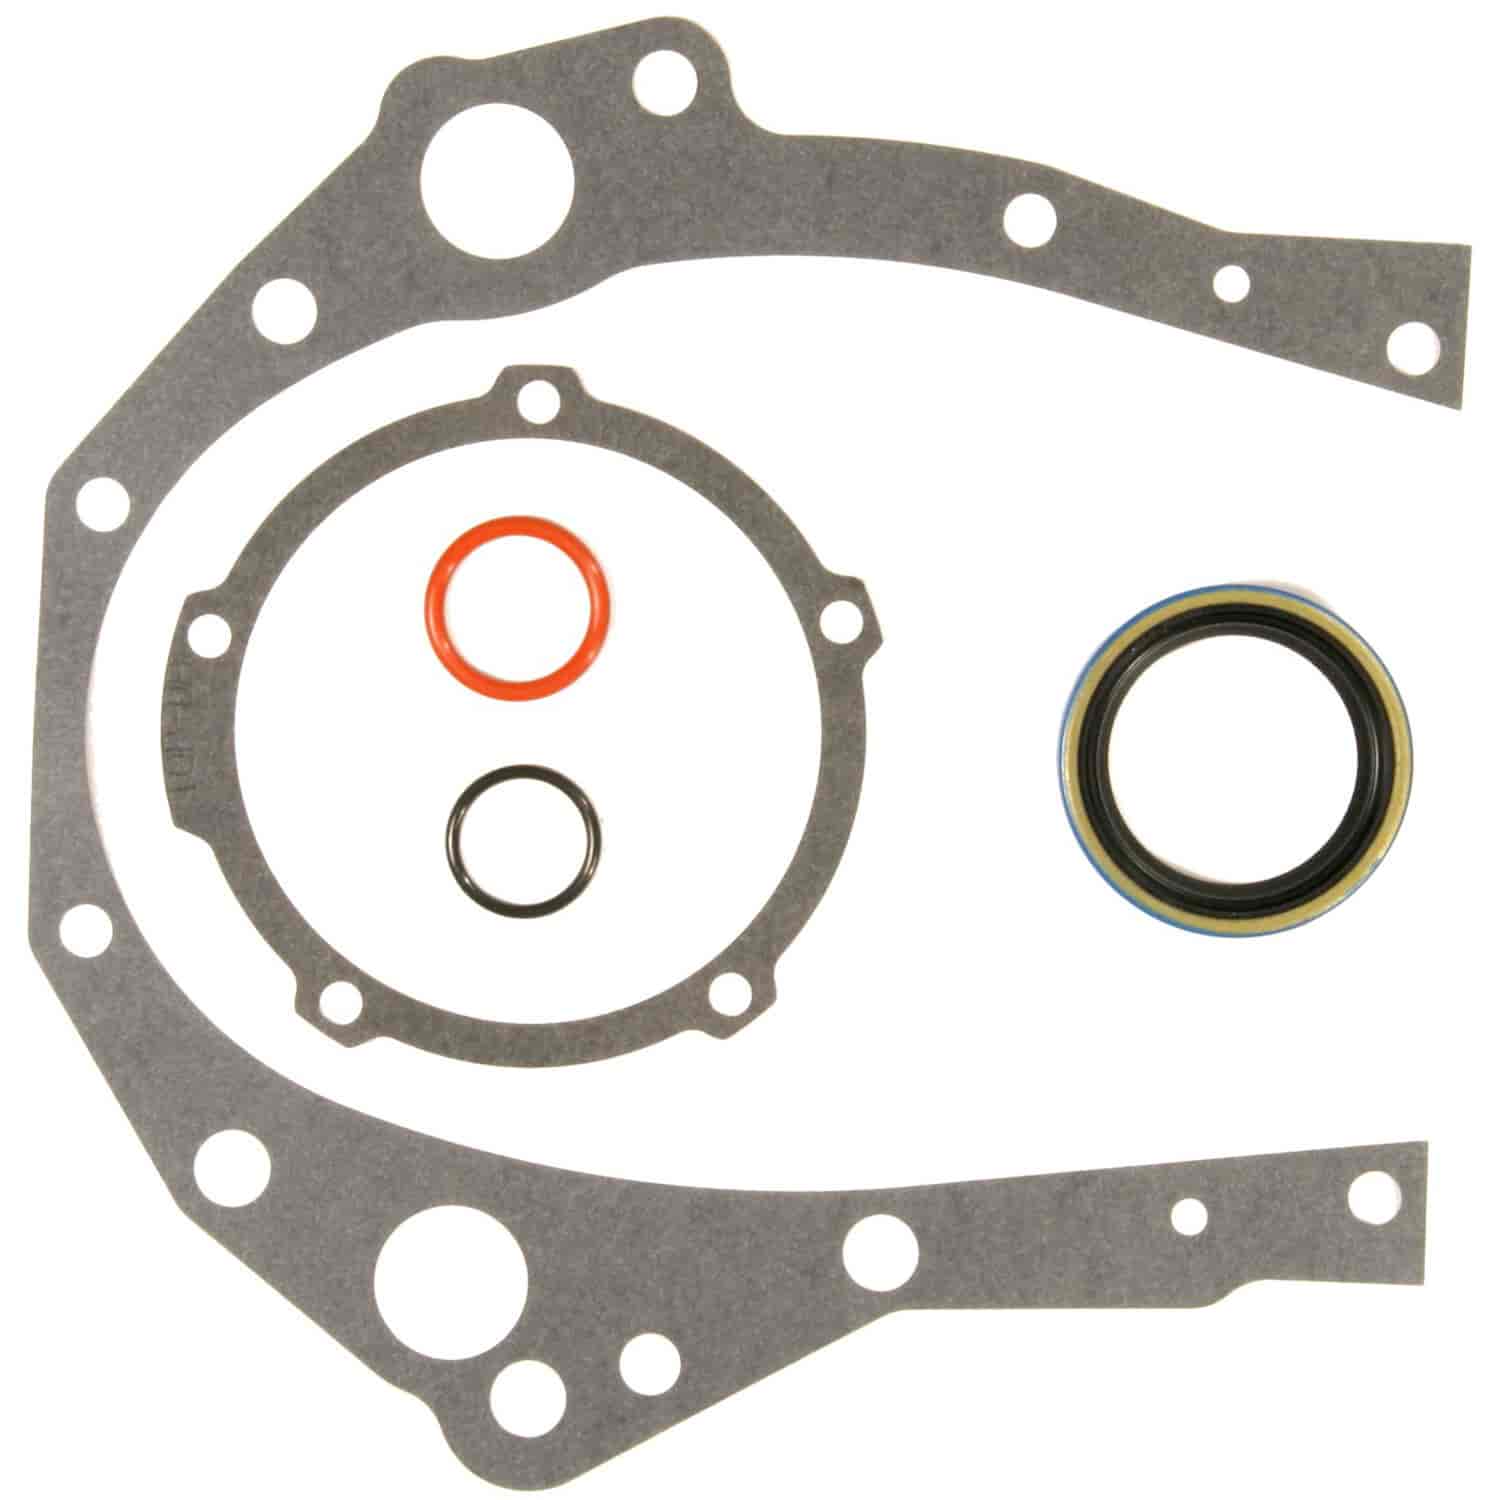 Timing Cover Gasket Set 1991-2005 Chevy V6 3.1L